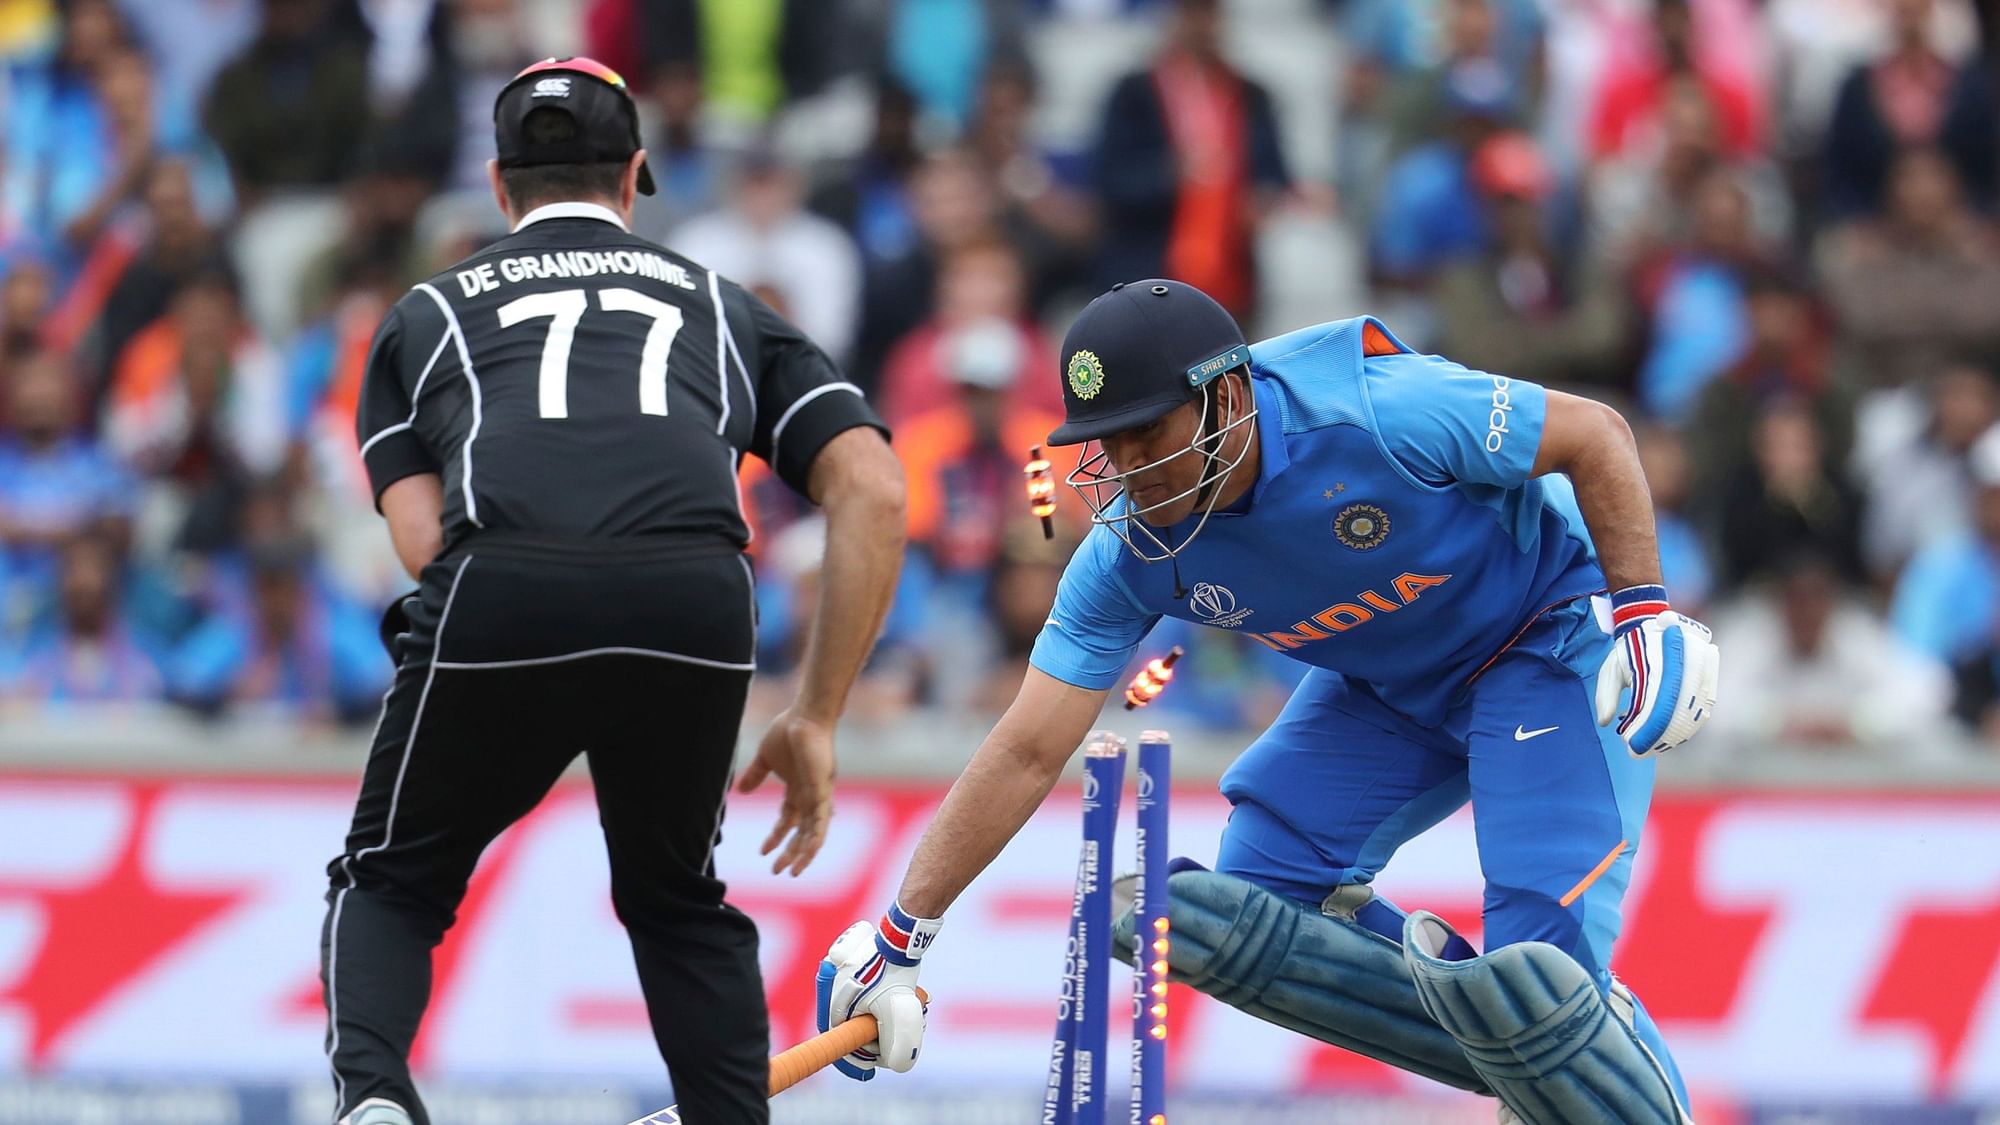 India’s Mahendra Singh Dhoni is run out during the Cricket World Cup semifinal match between India and New Zealand at Old Trafford.